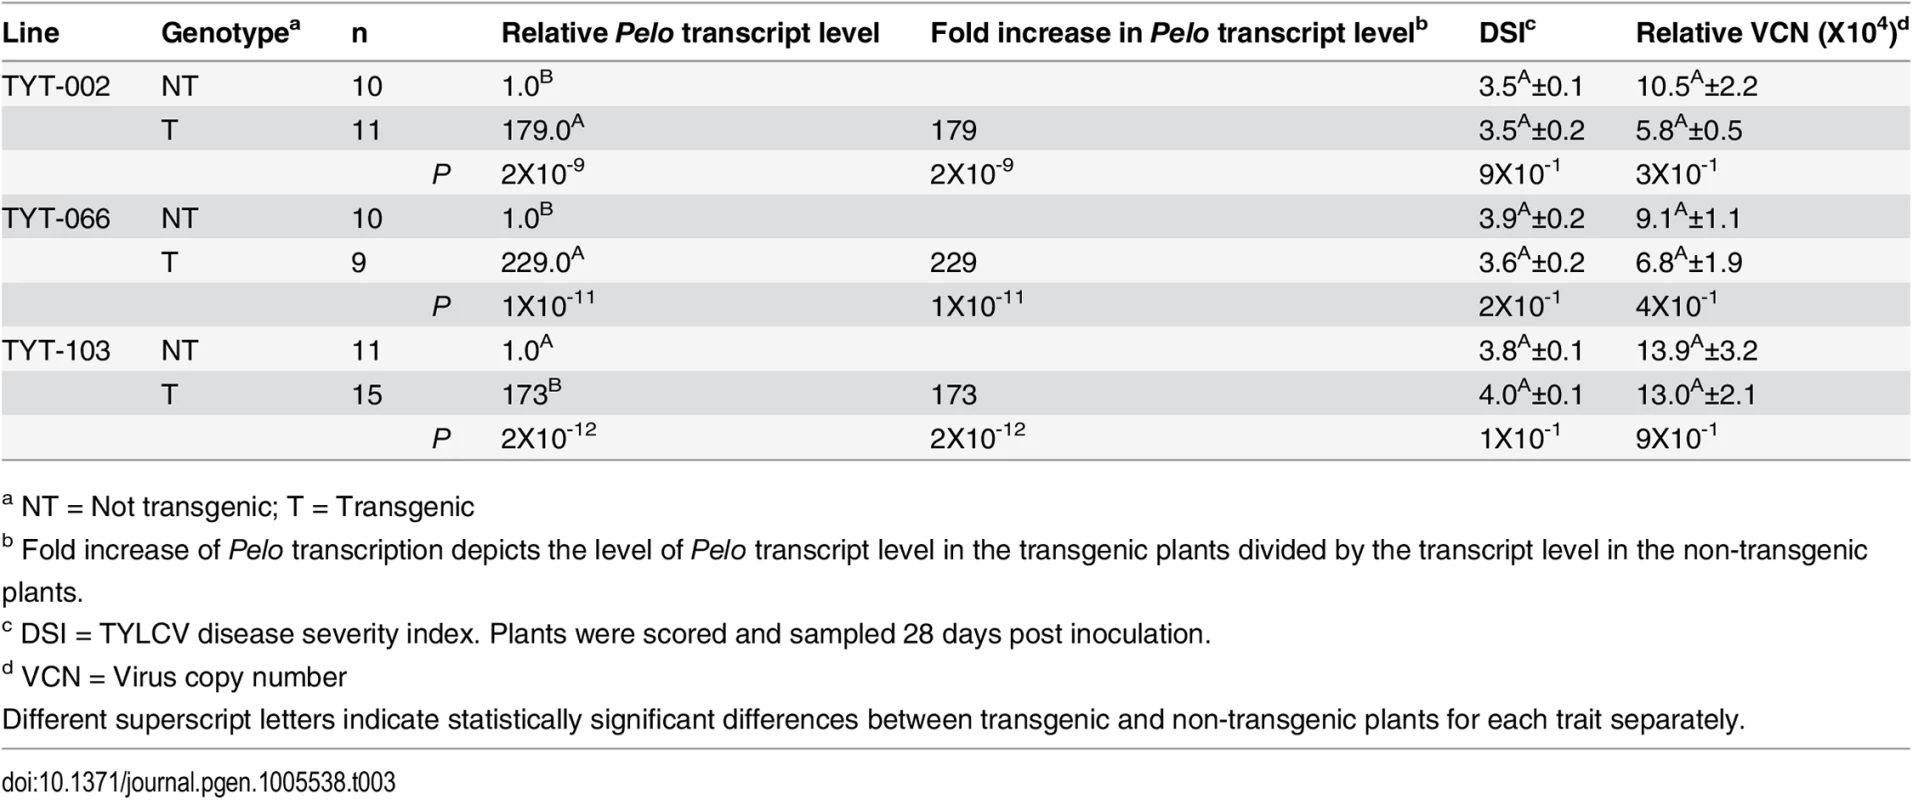 Effect of over-expressing the <i>Pelo</i> allele derived from TY172 plants in transgenic R13 plants.